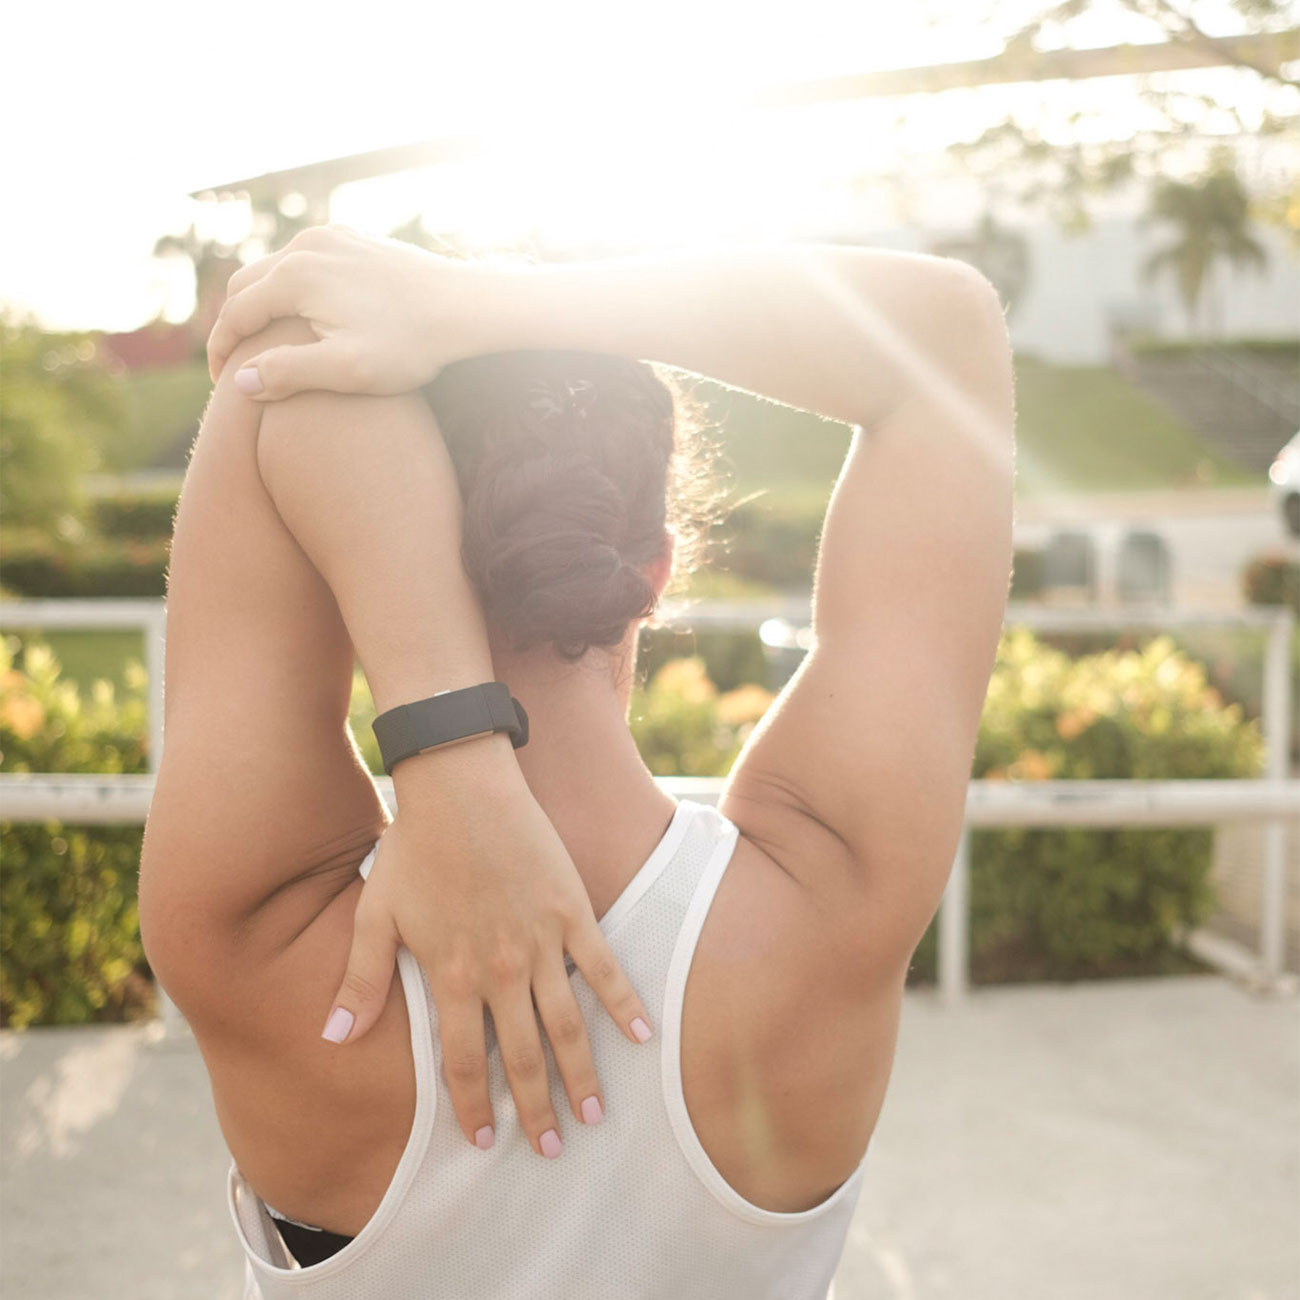 Woman stretching her arms after an outdoor workout